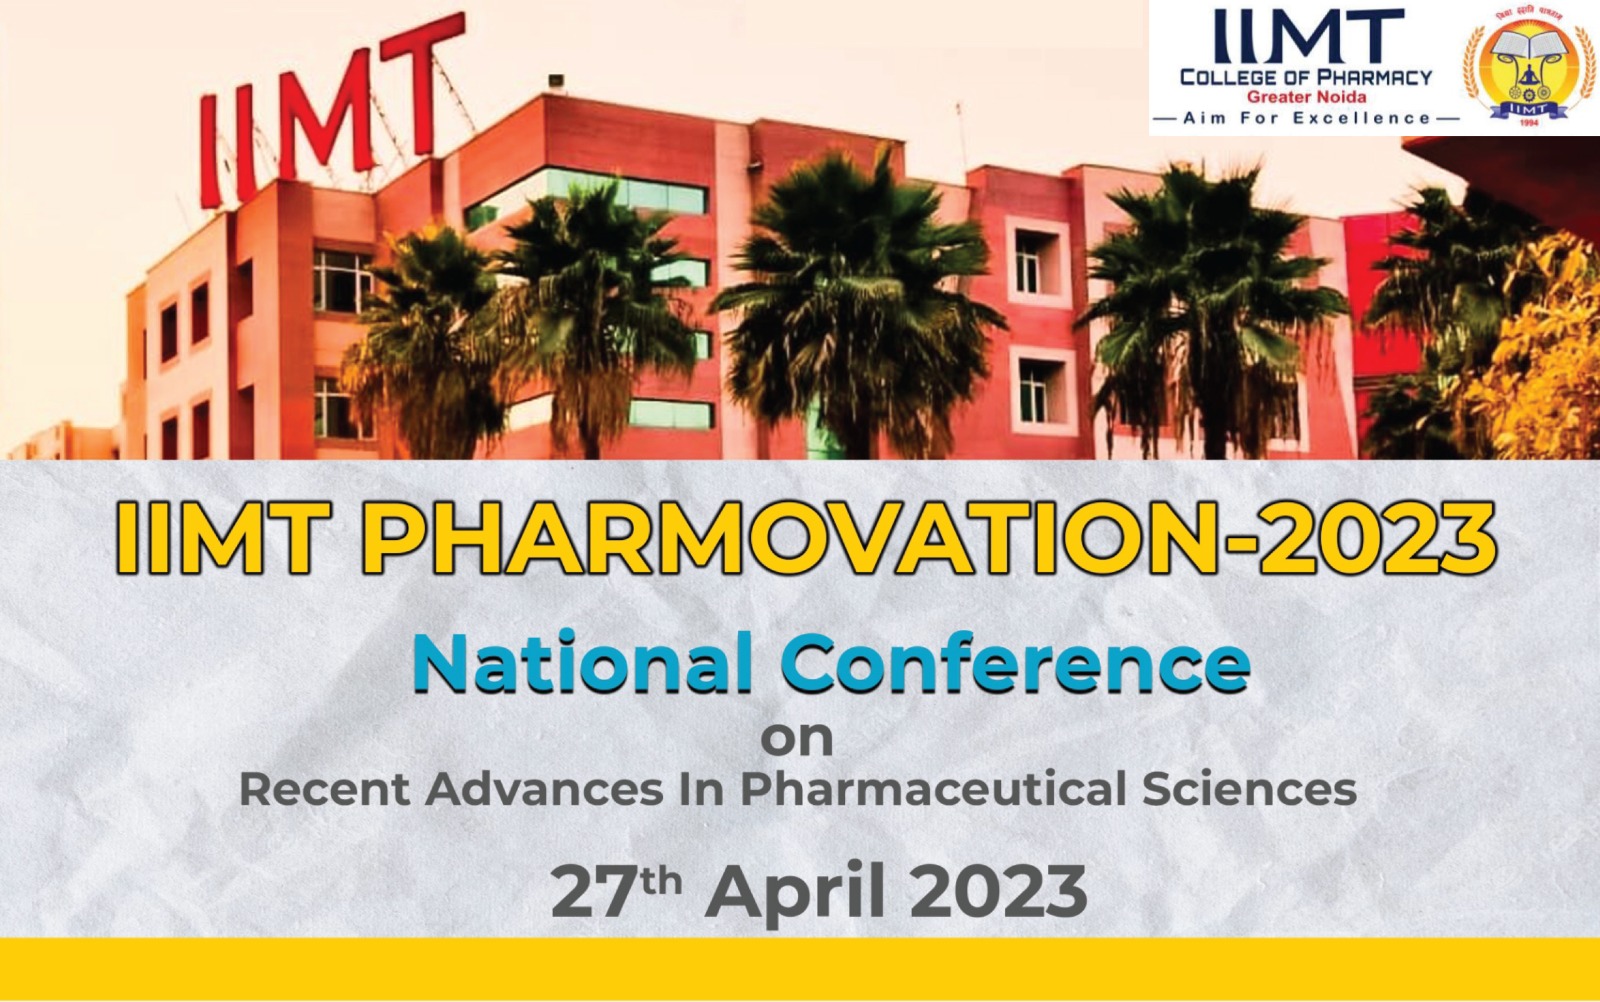 National Conference on Recent advances in pharmaceutical sciences